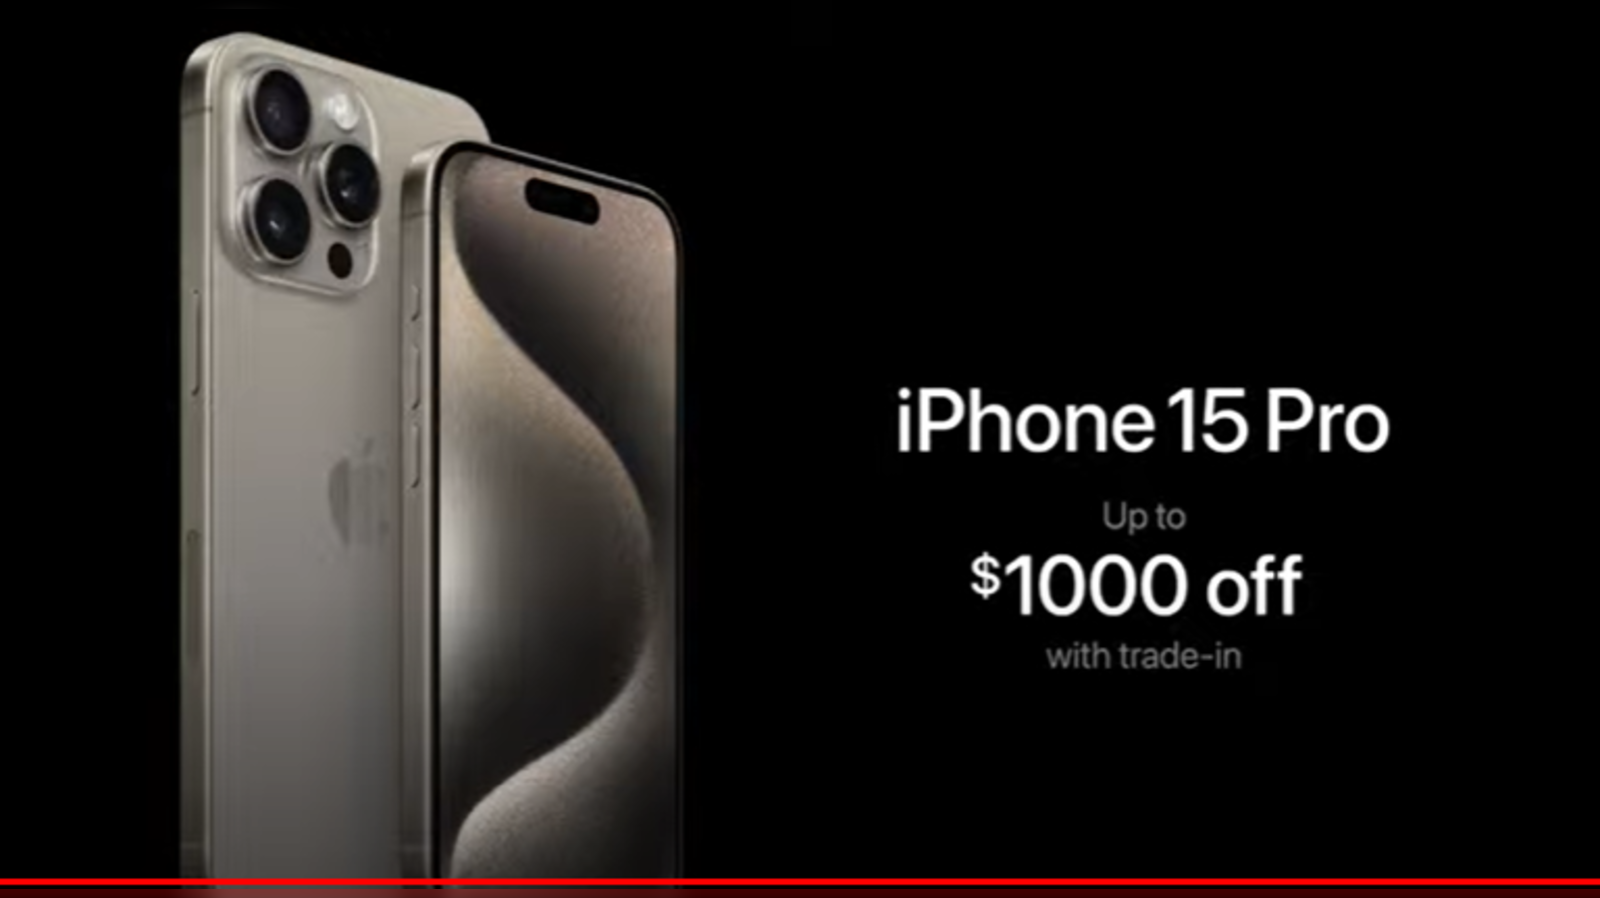 Apple unveils iPhone 15 Pro and iPhone 15 Pro Max - Apple (IN)